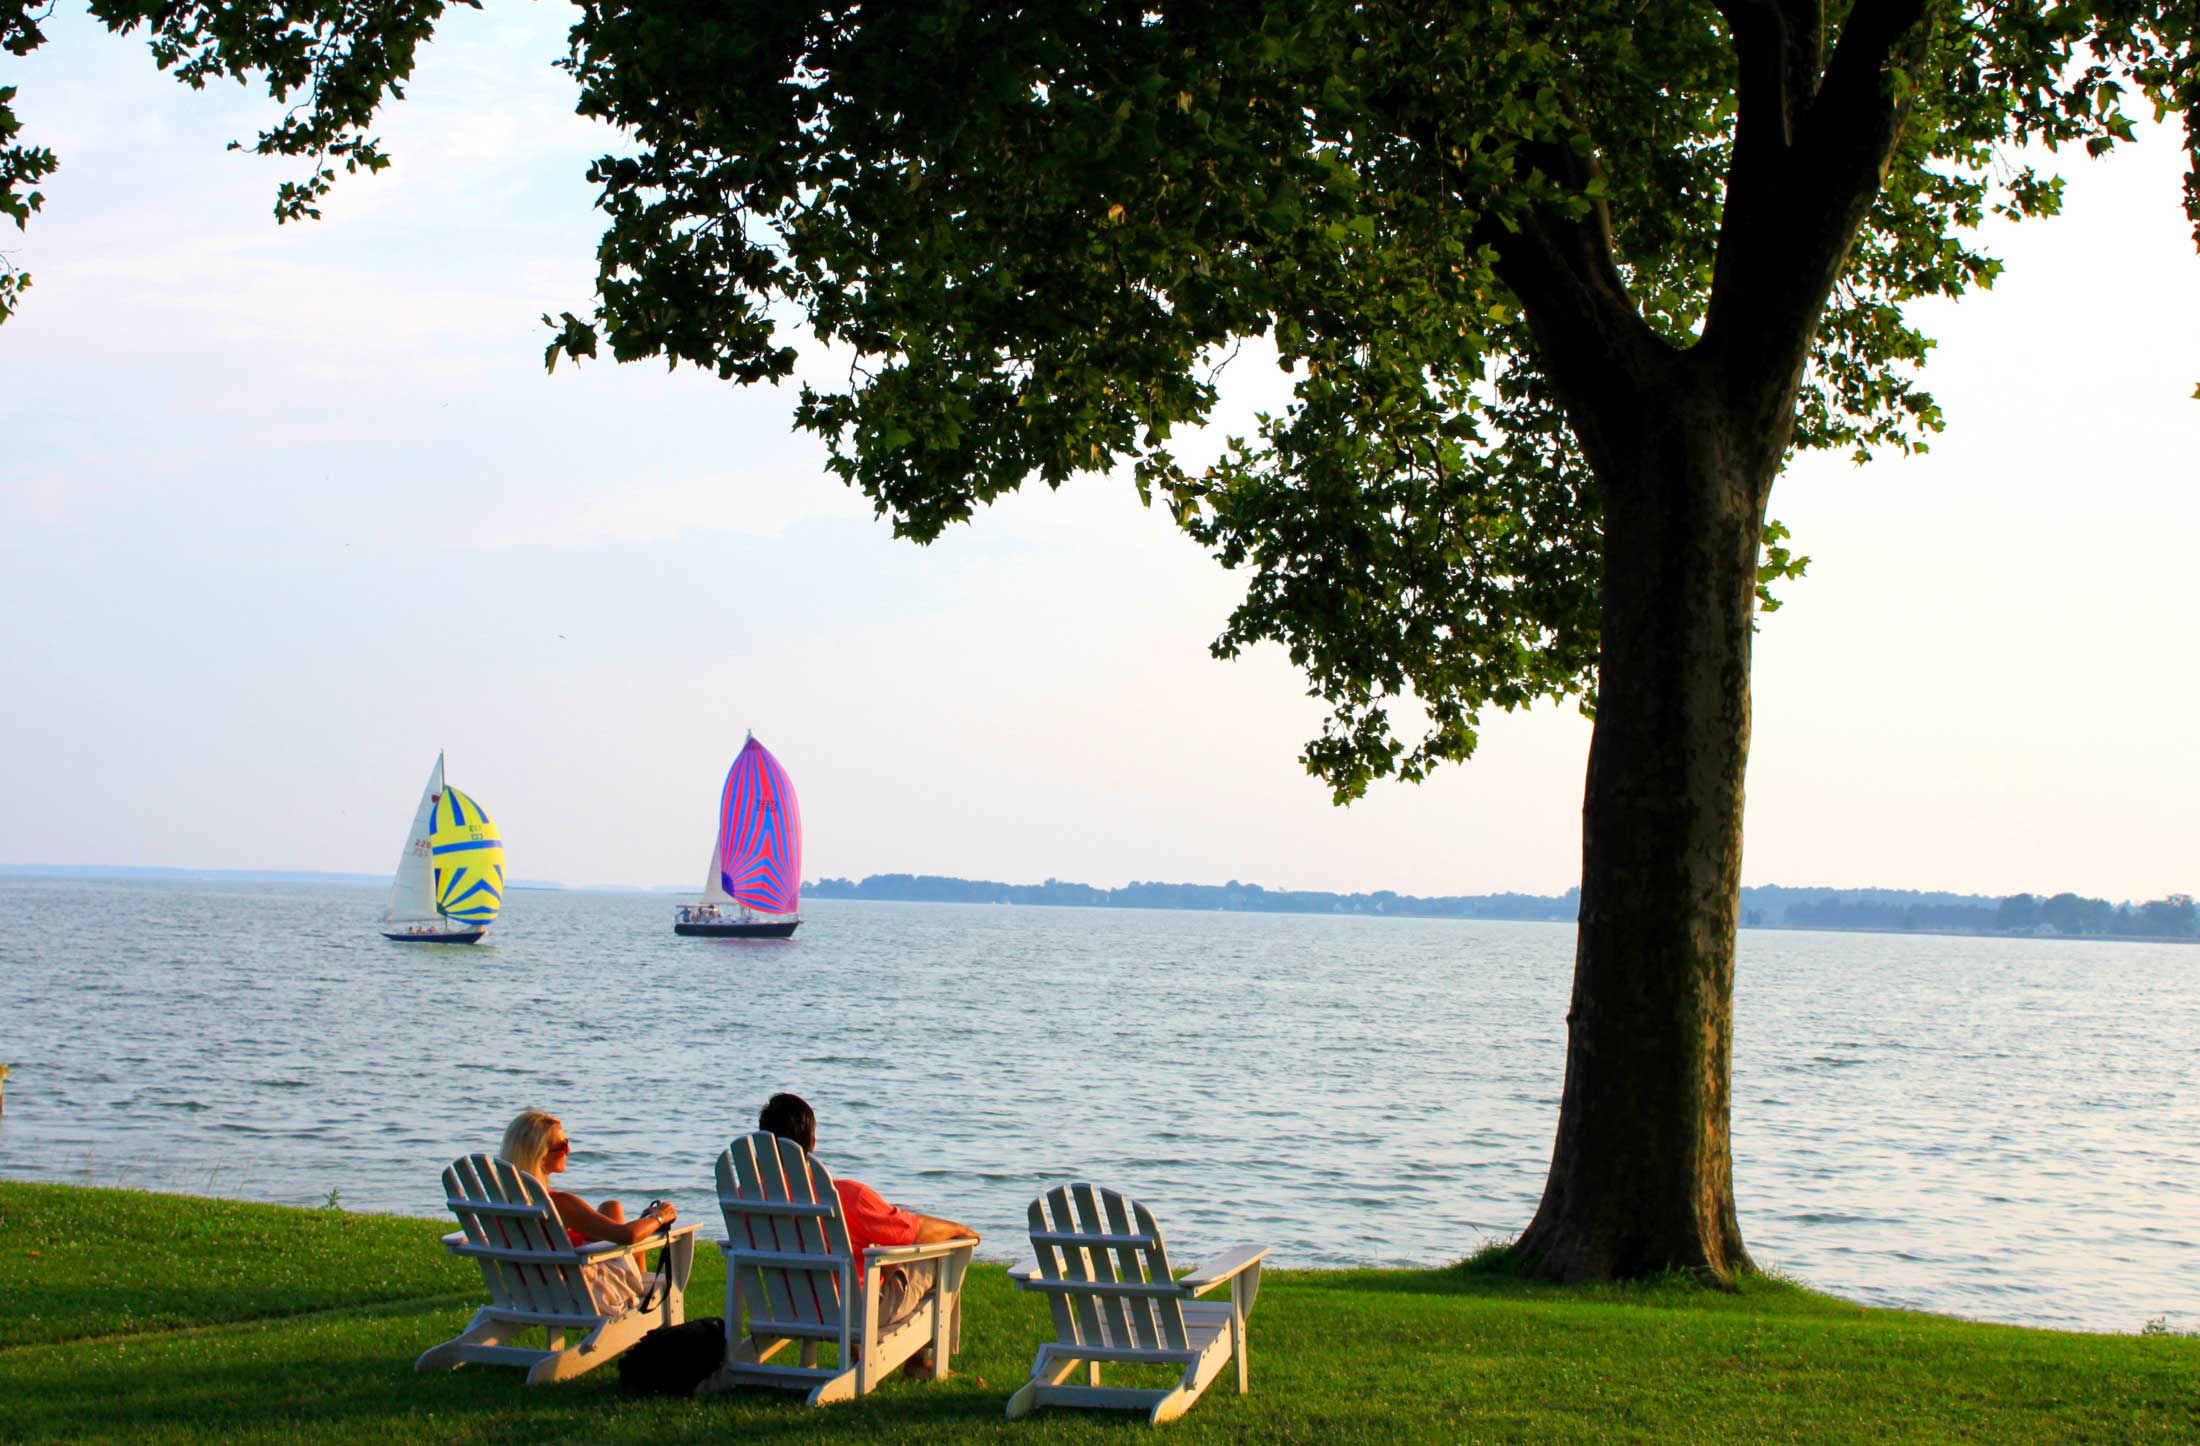 Couple watching colorful sailboats on a waterfront lawn